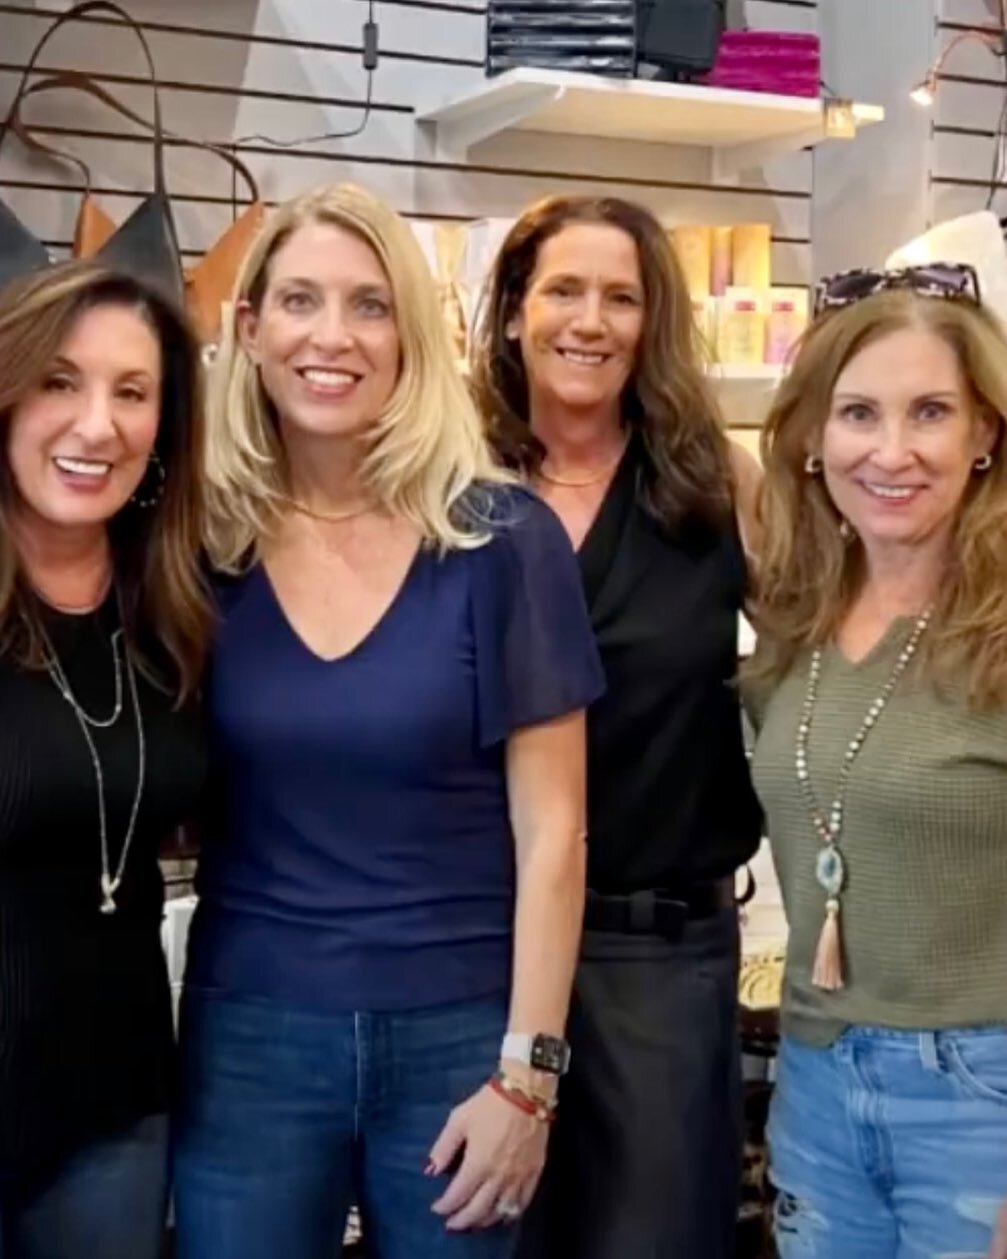 Women supporting women!
These dynamos opened a second location for their glorious @lavenderandsageboutique this past week inside @mondo_summit 

Both locations are filled with all the goodies you didn&rsquo;t even know you needed!

@hjblock234 launch